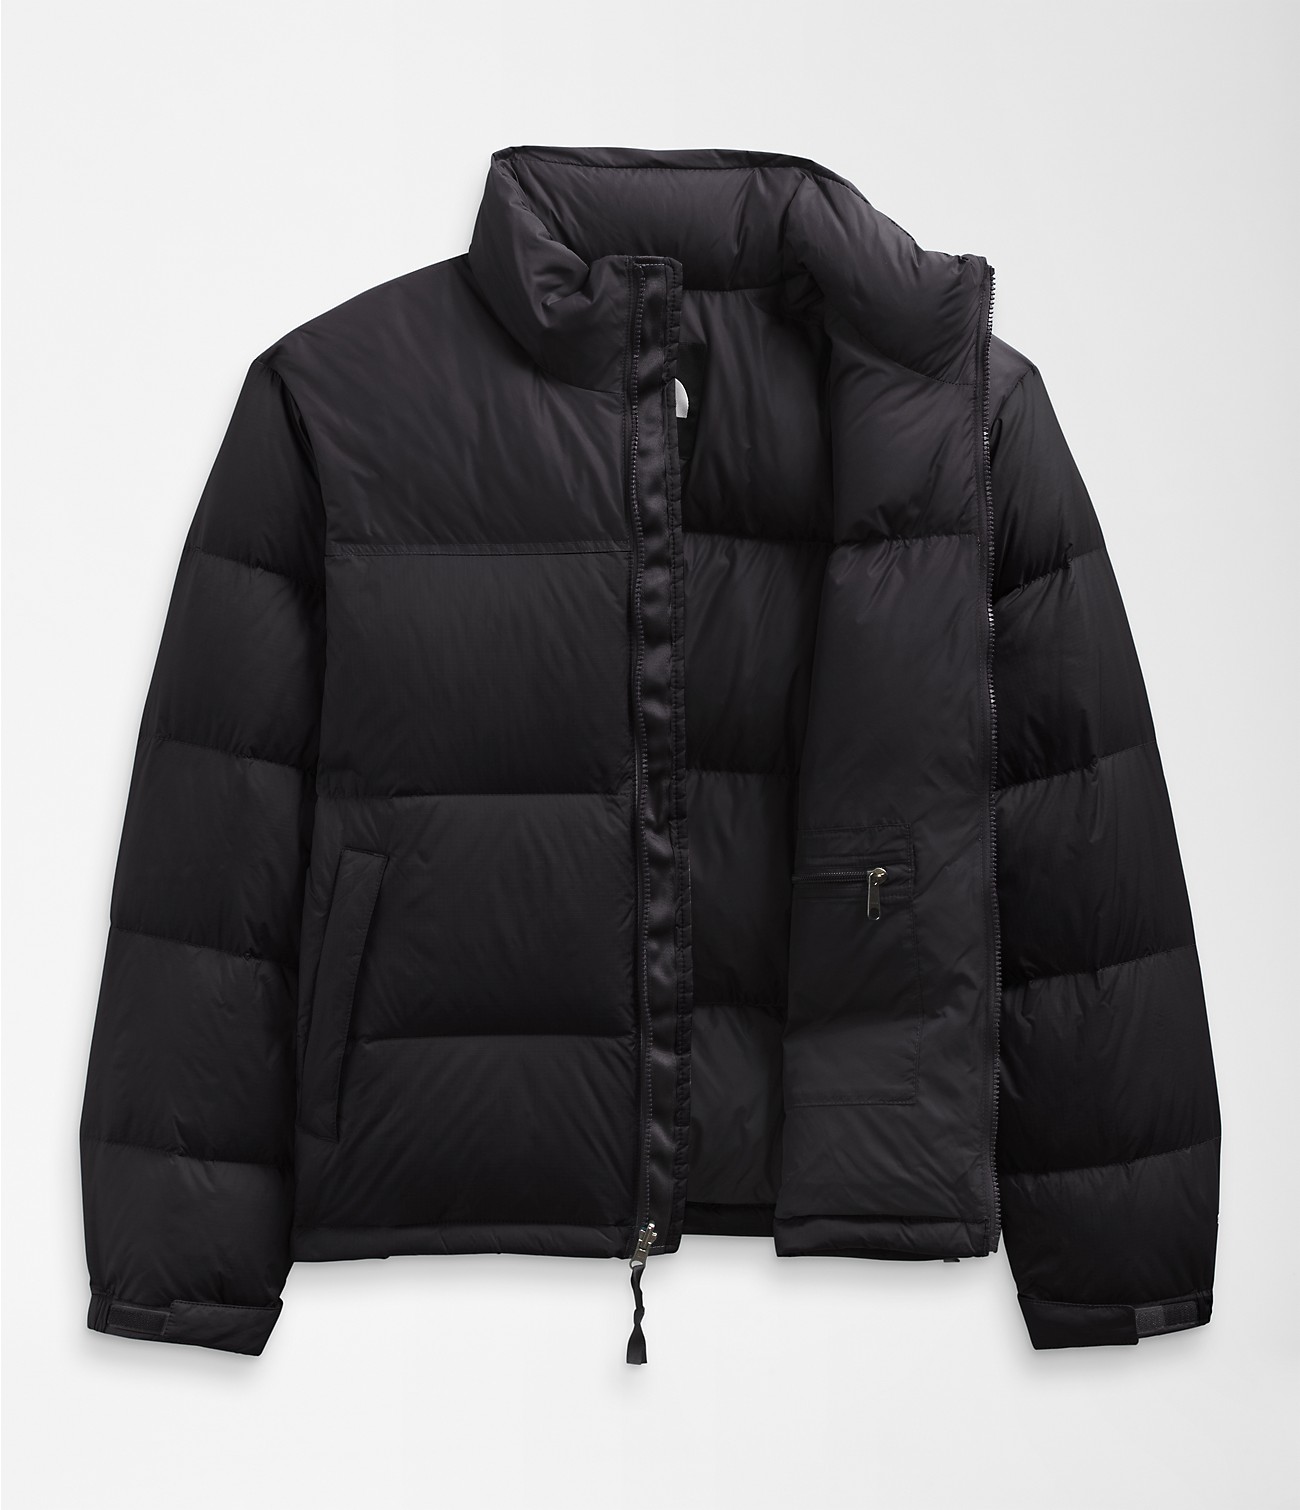 Official North Face Puffer Jacket